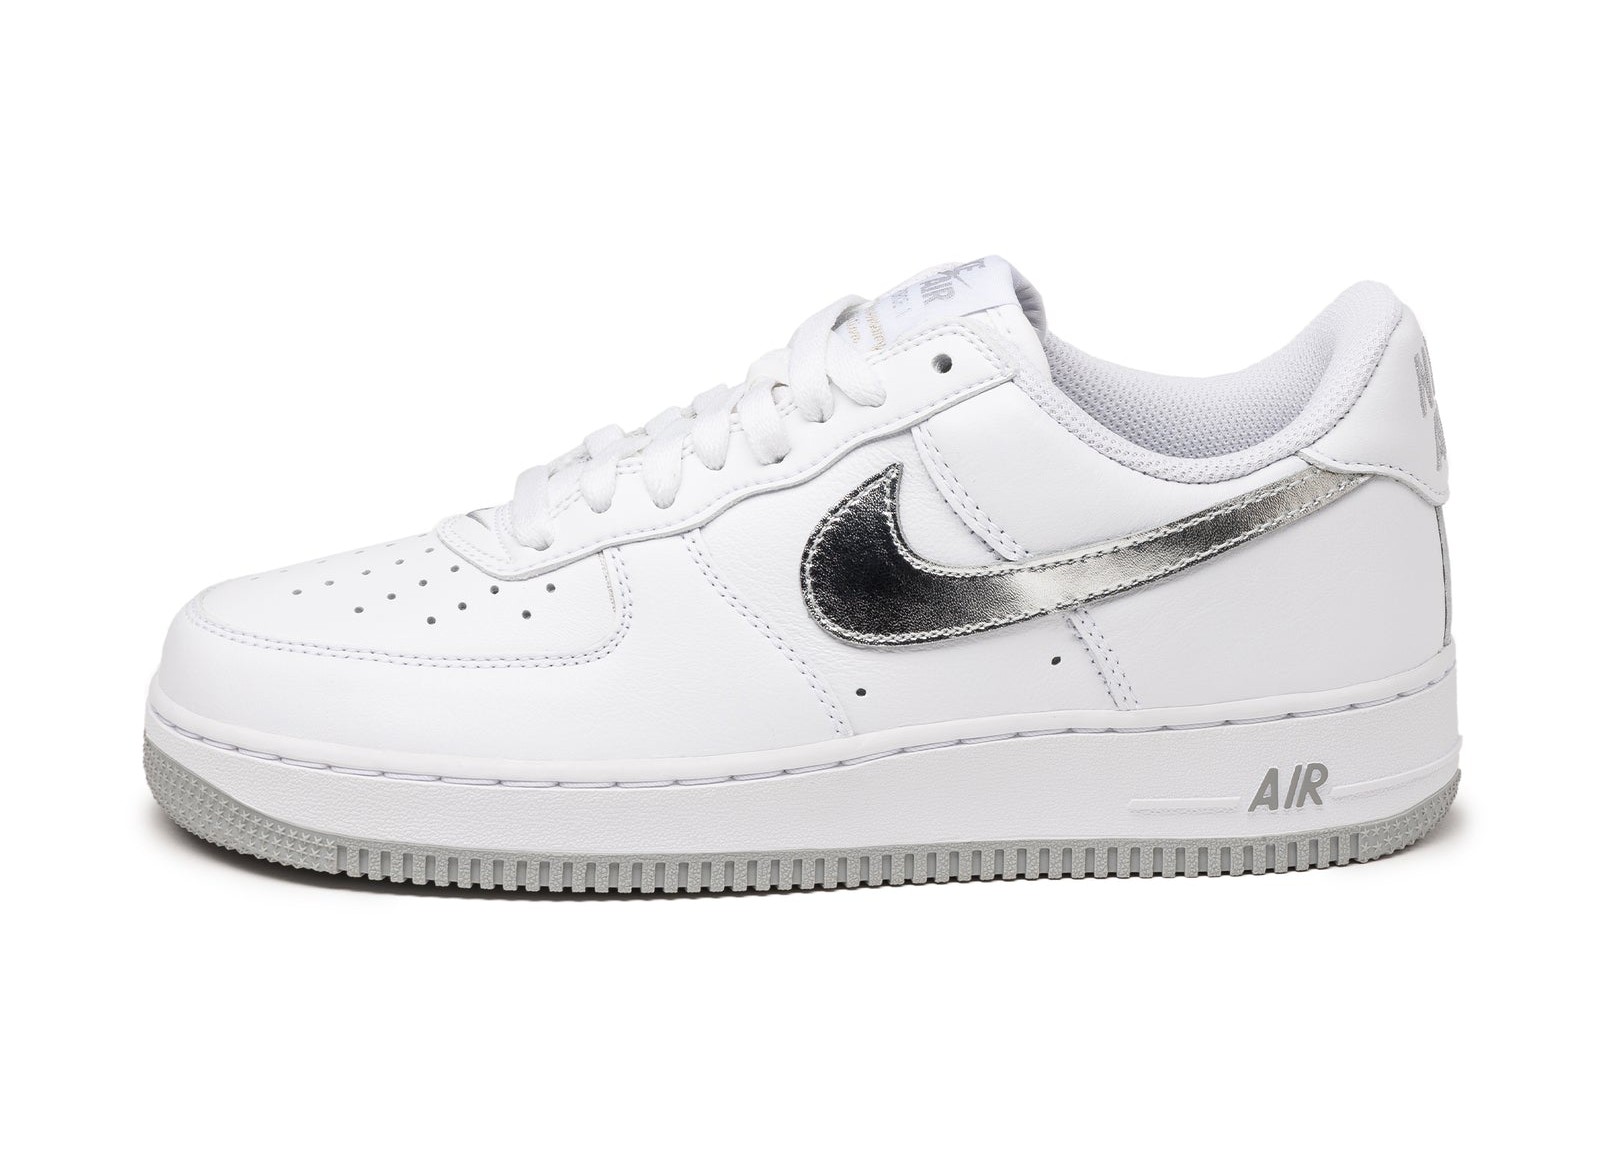 Nike Air Force 1 Low Retro
« Color of the Month »